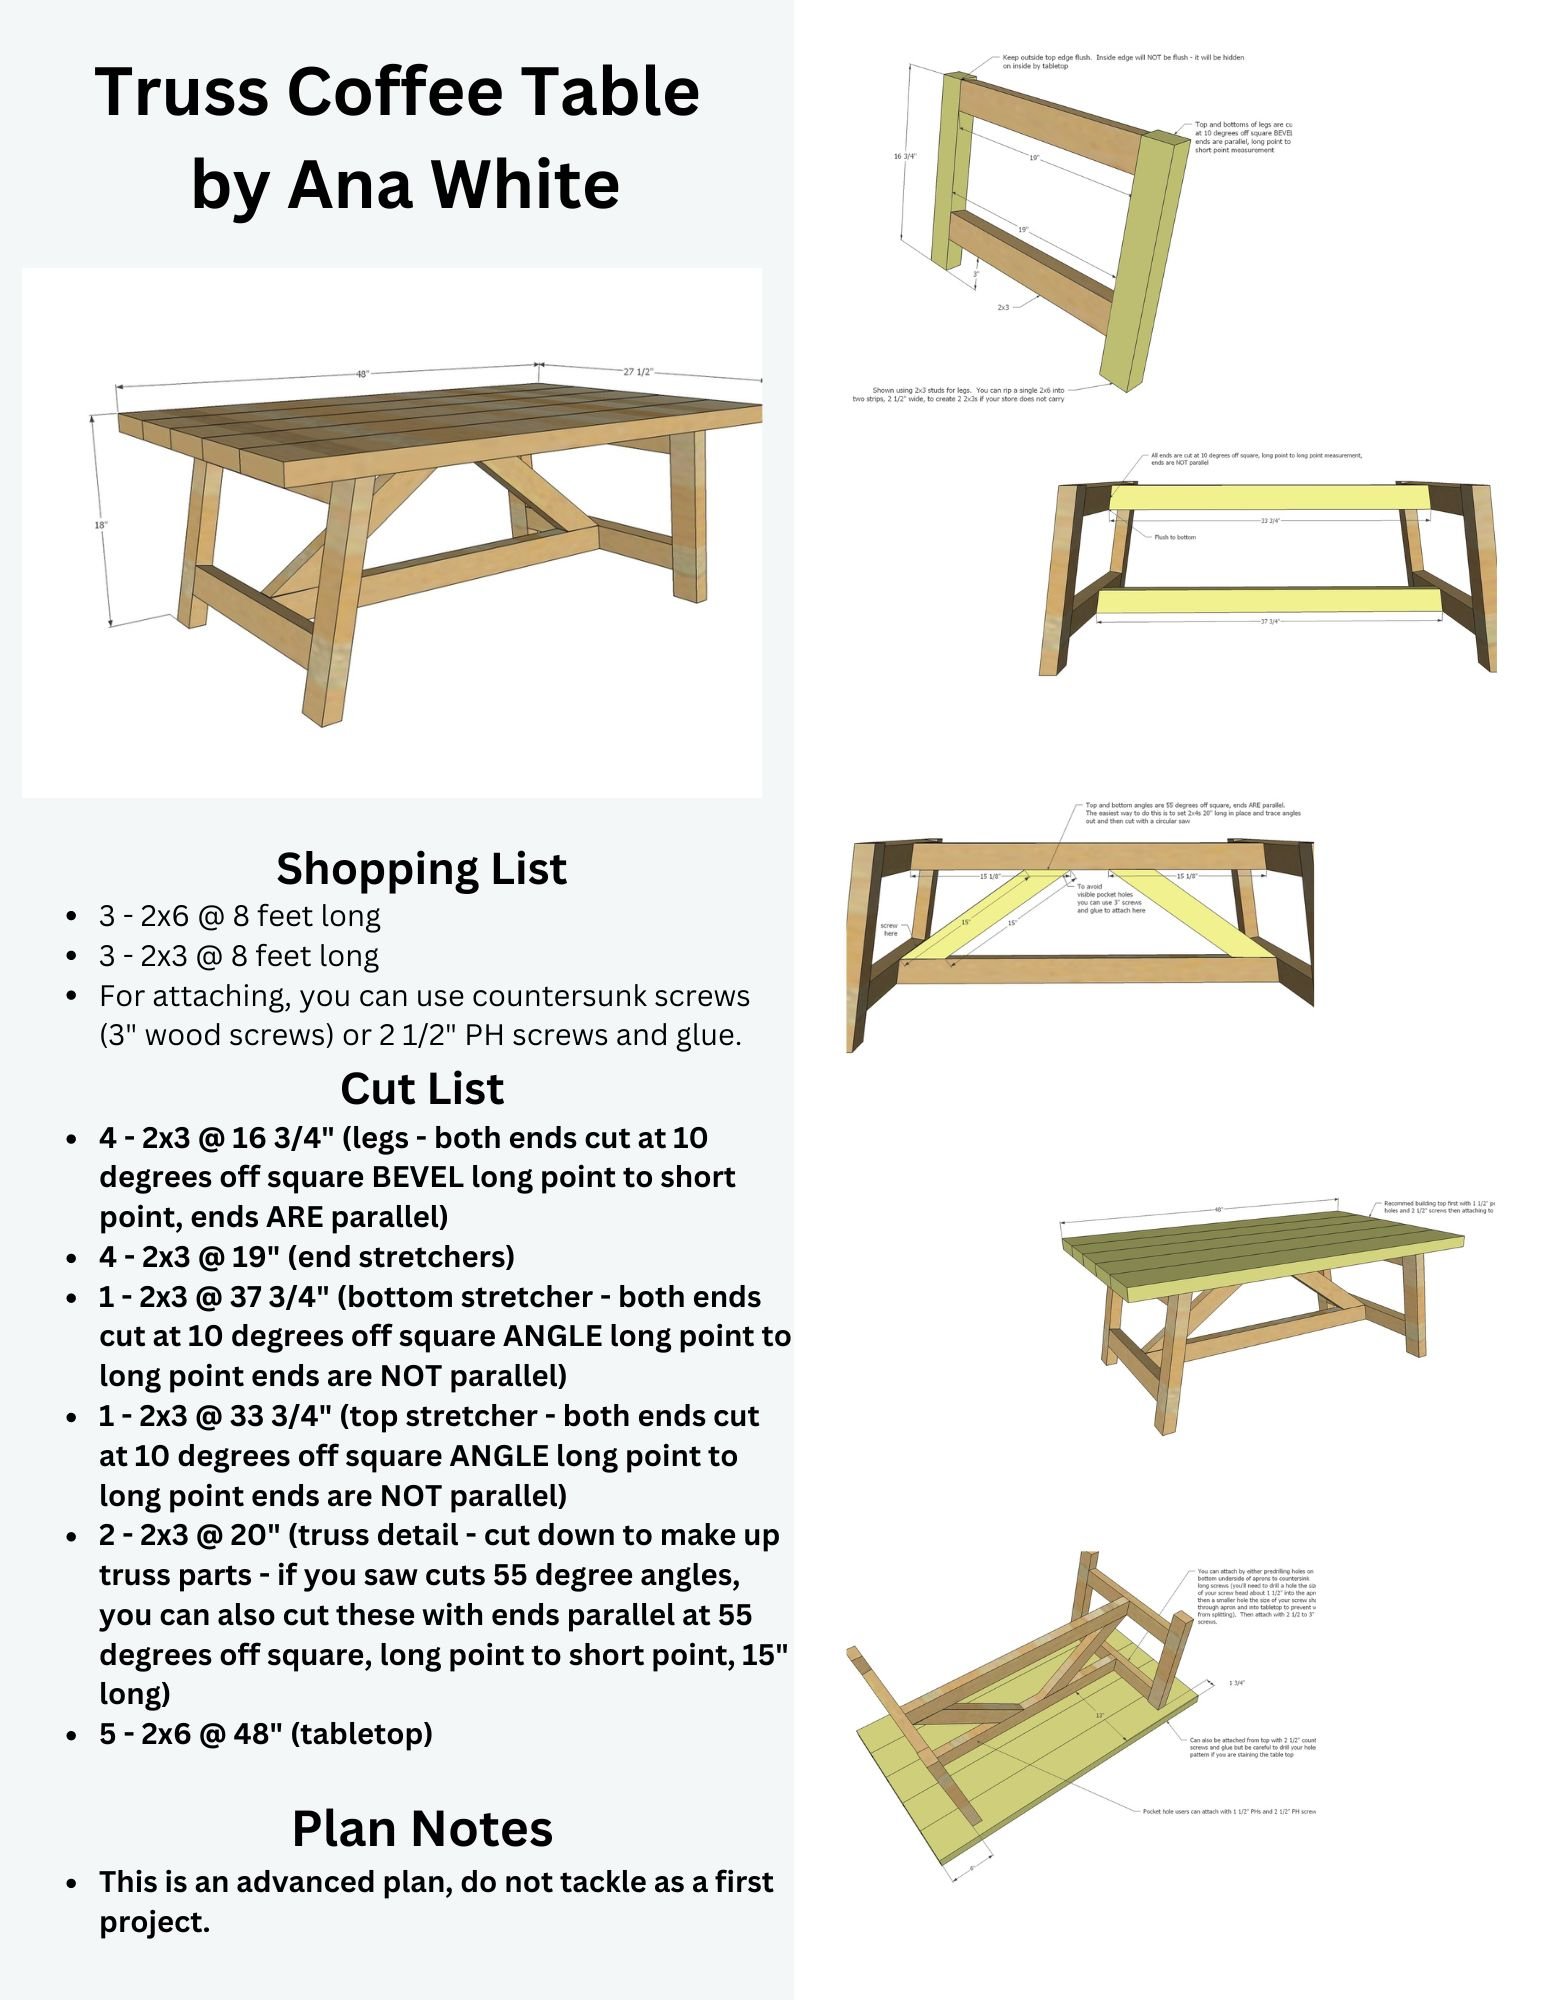 Truss Coffee Table Plans